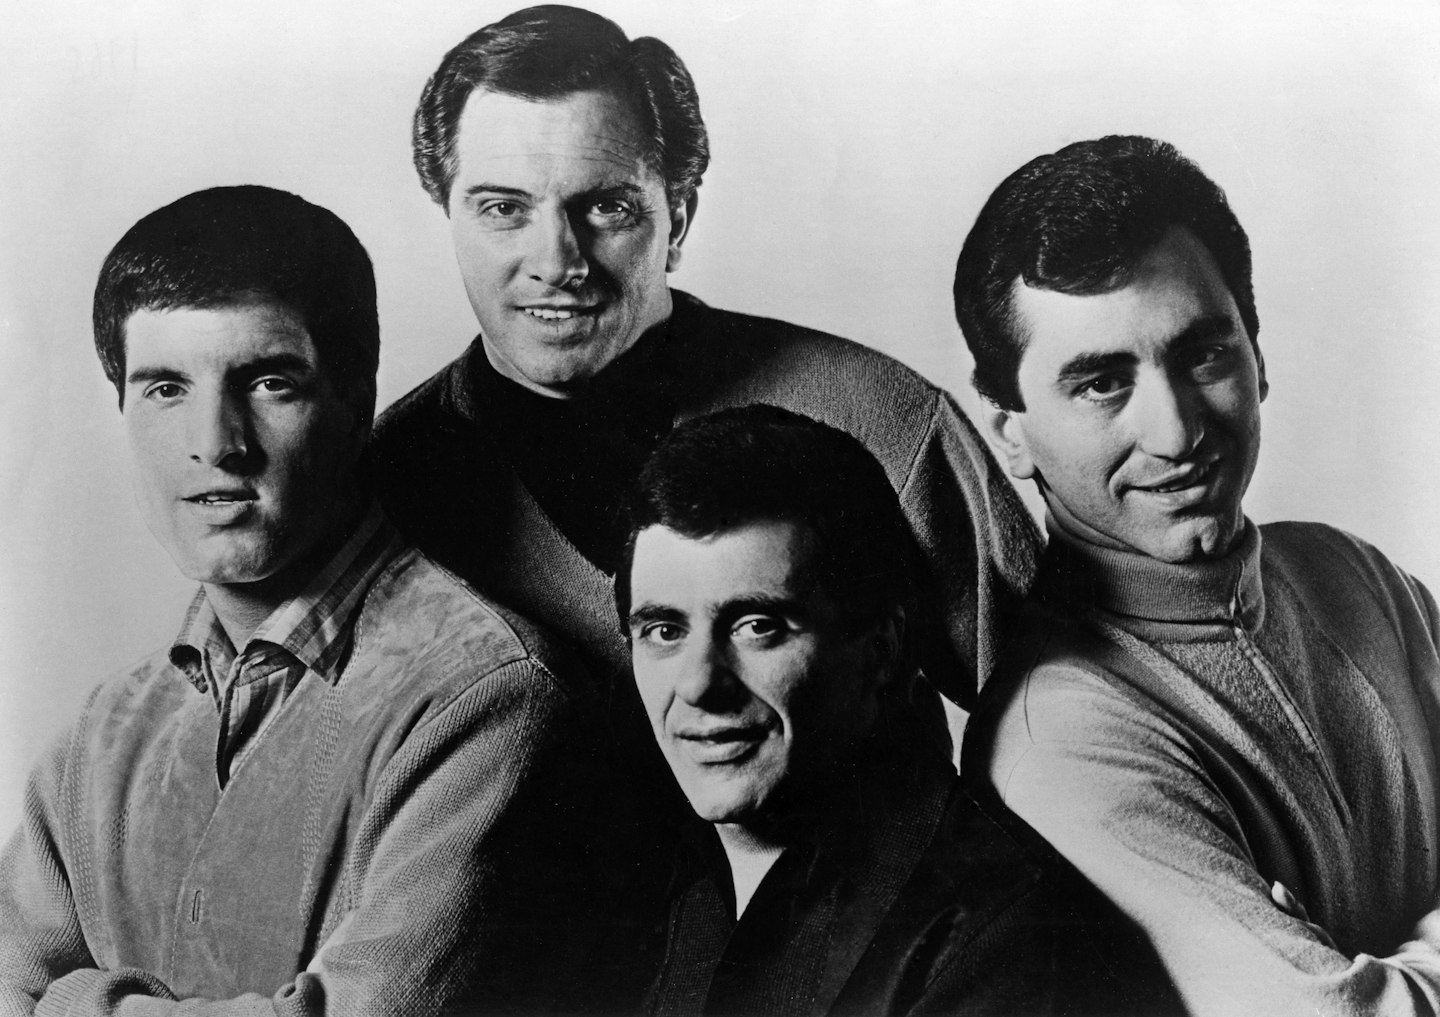 Frankie Valli and the four seasons